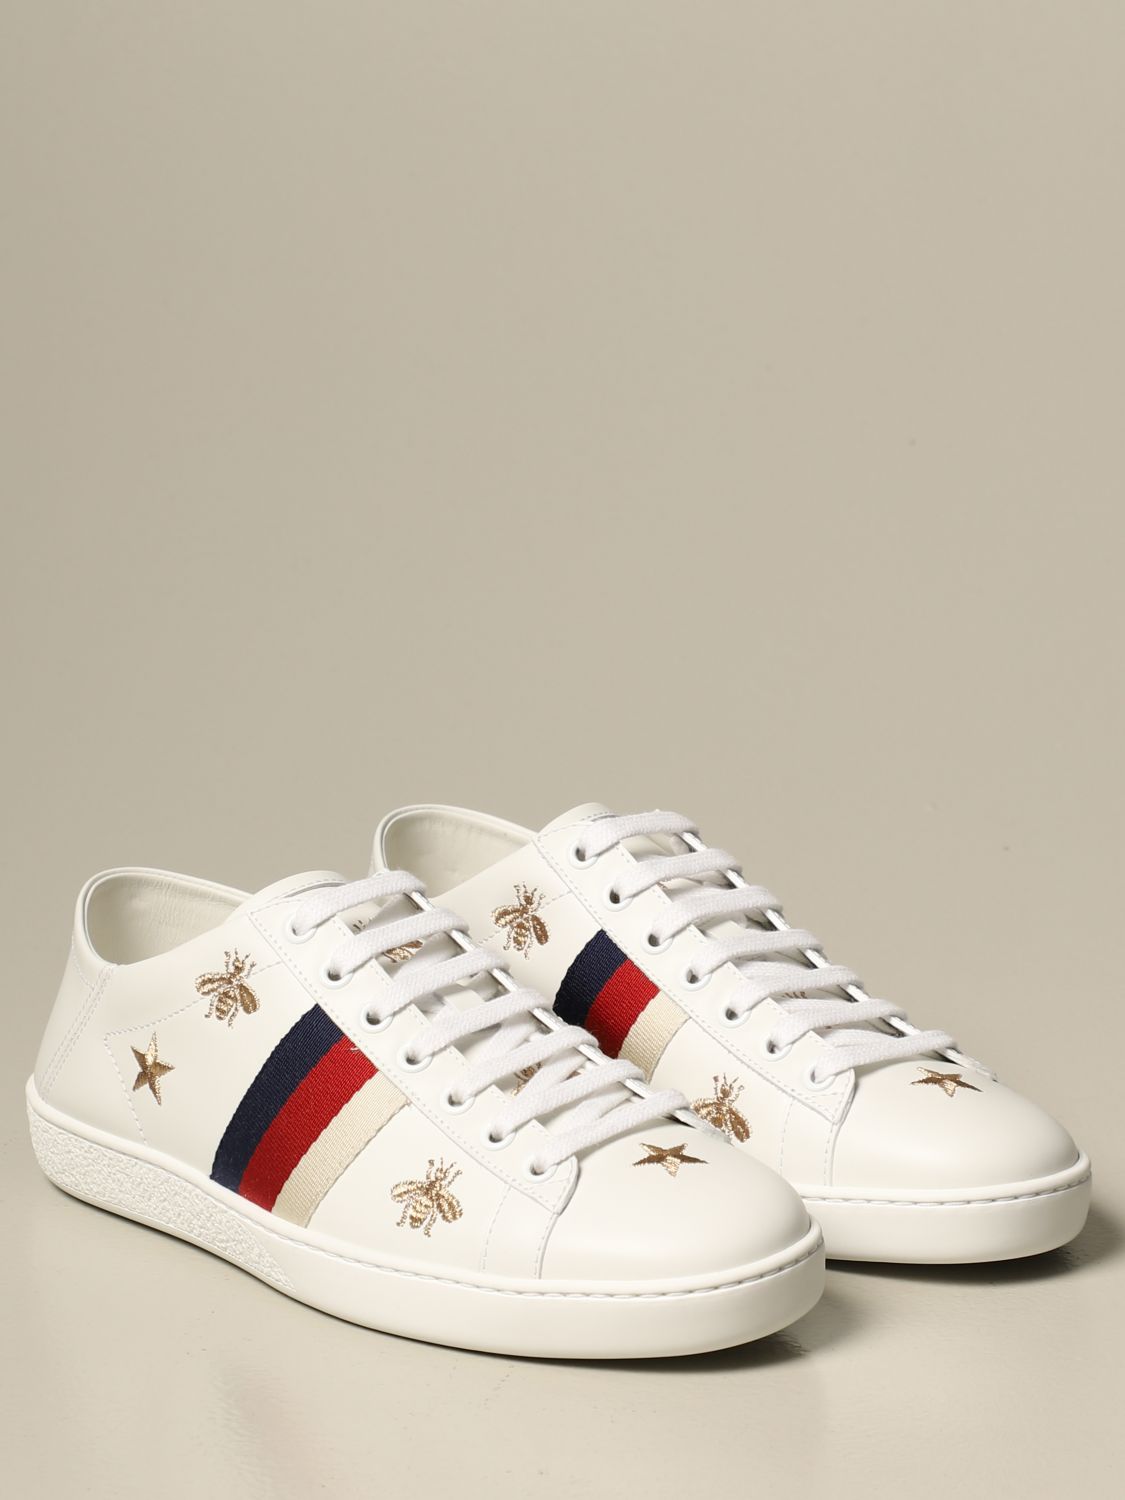 GUCCI Ace sneakers in leather with bees and stars Sneakers Gucci